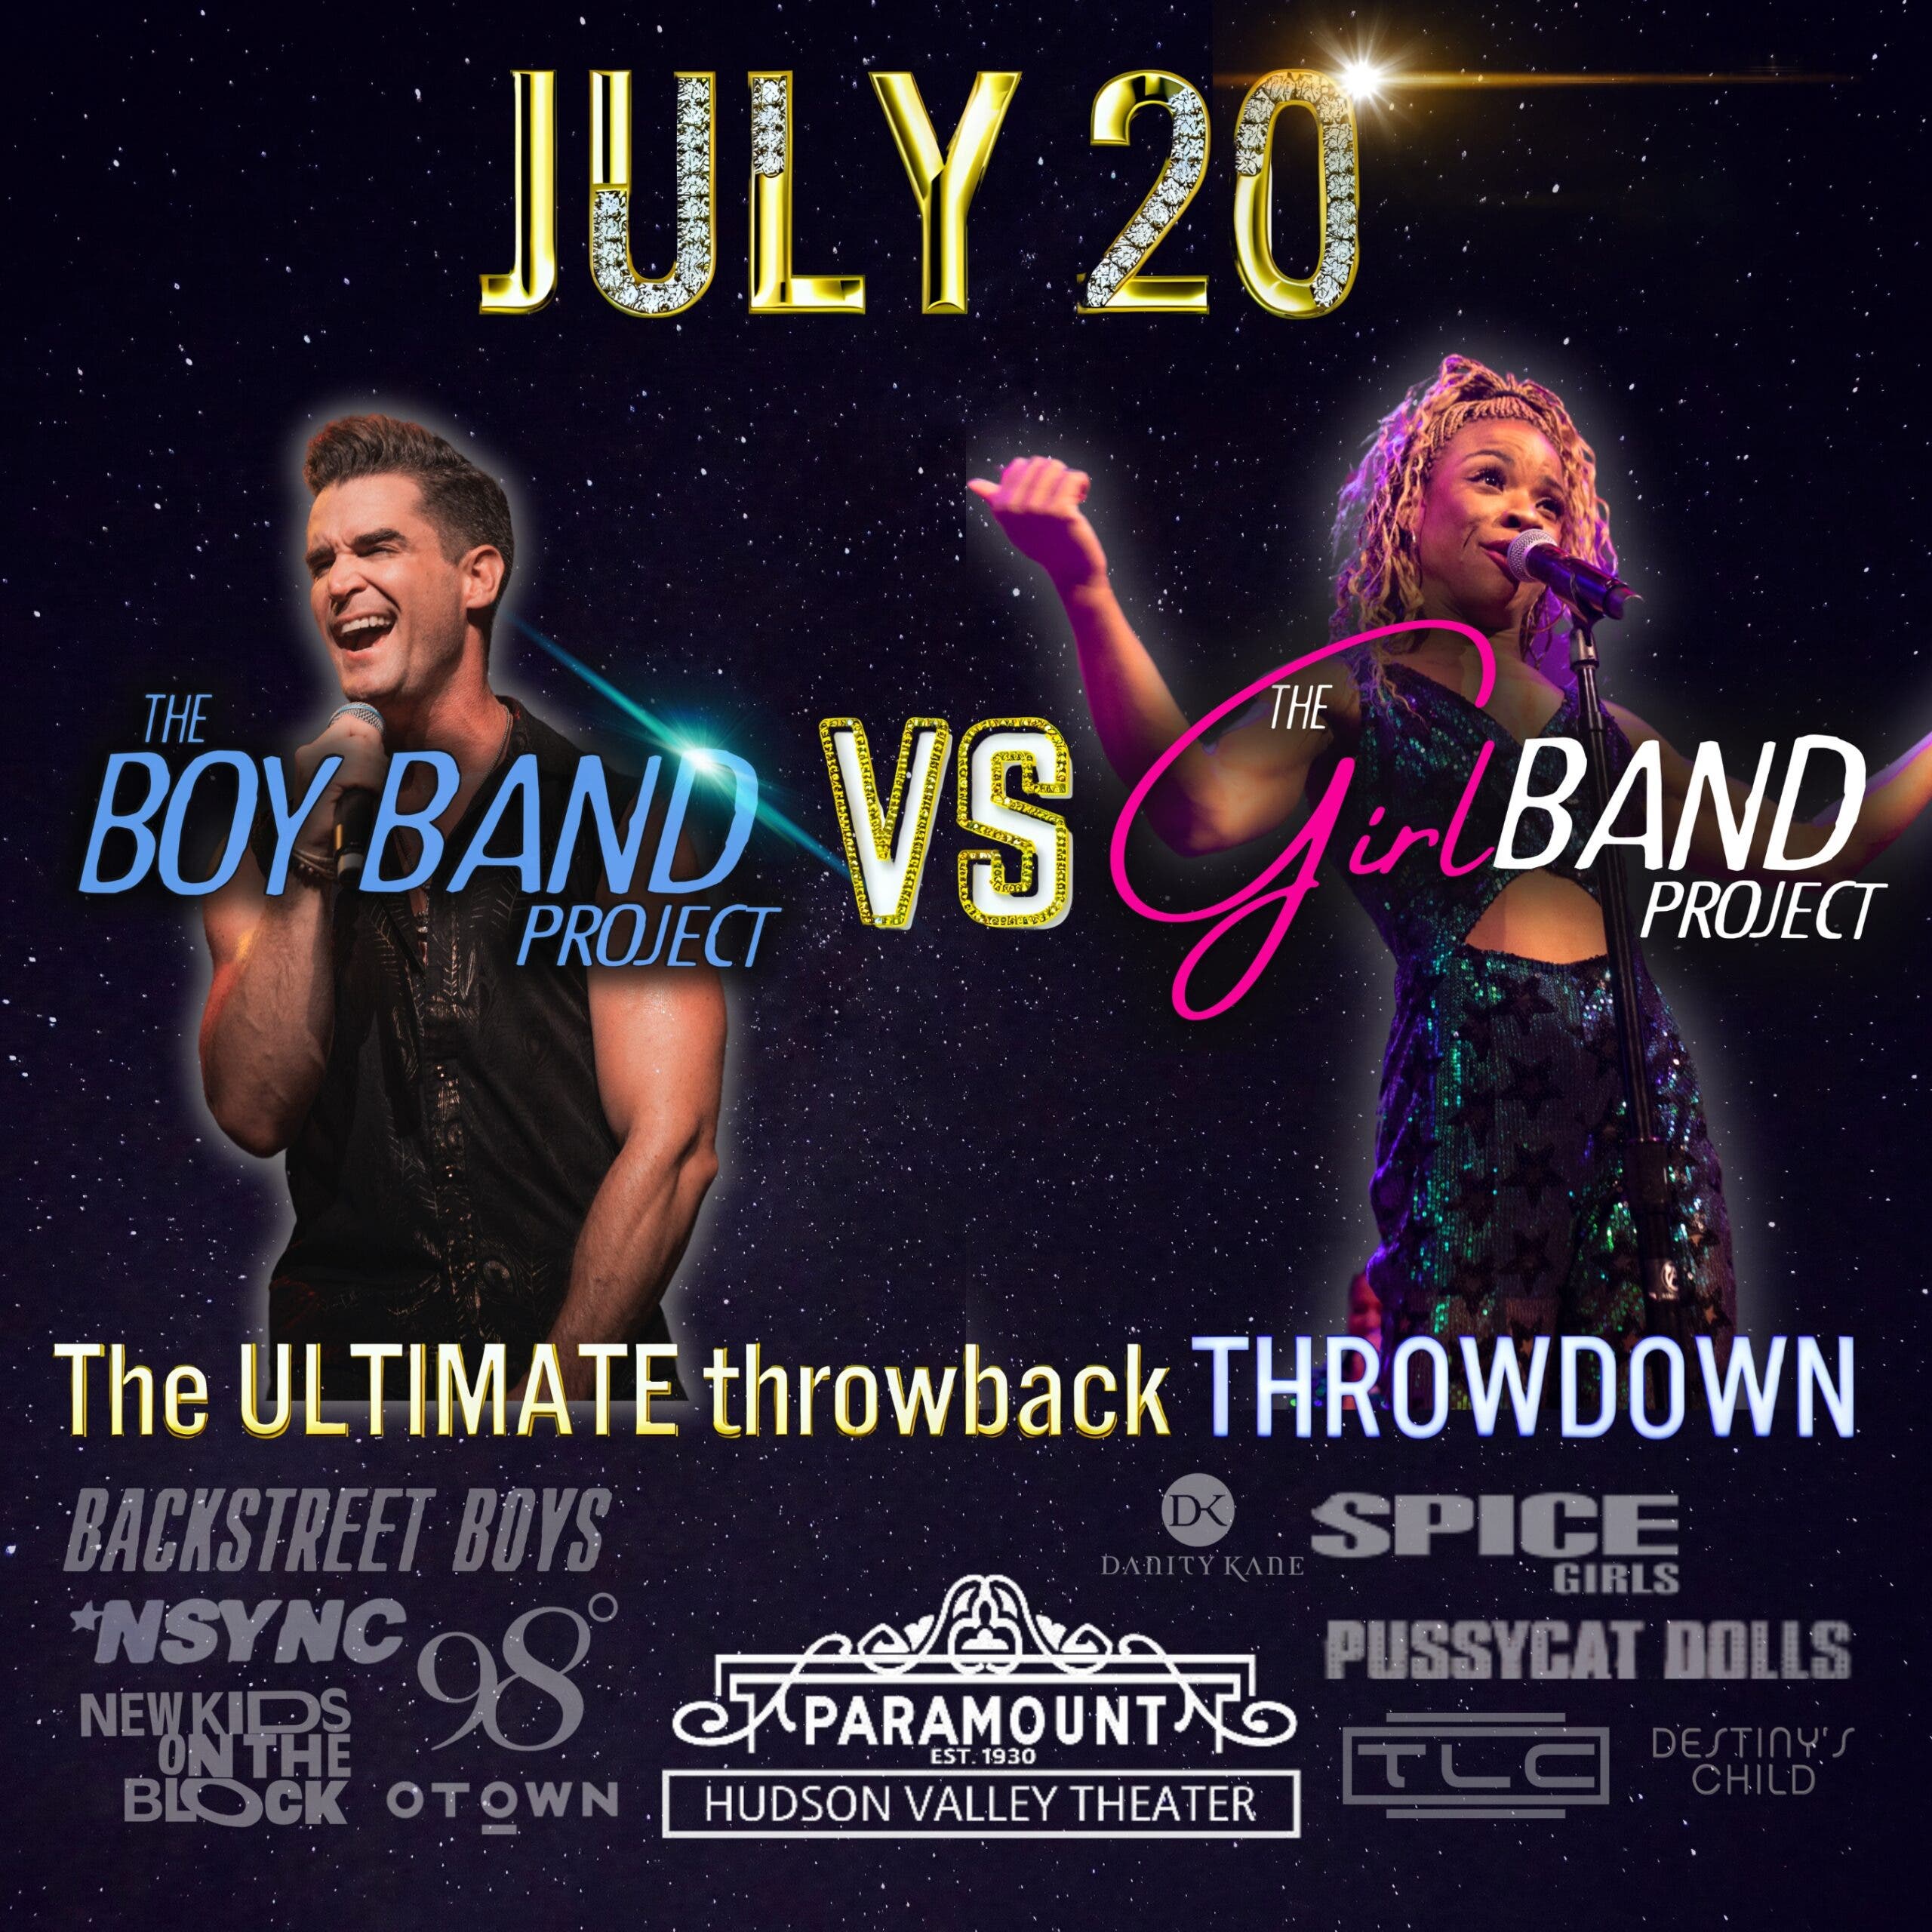 The Boy Band Project VS The Girl Band Project: The Ultimate Throwback Throwdown